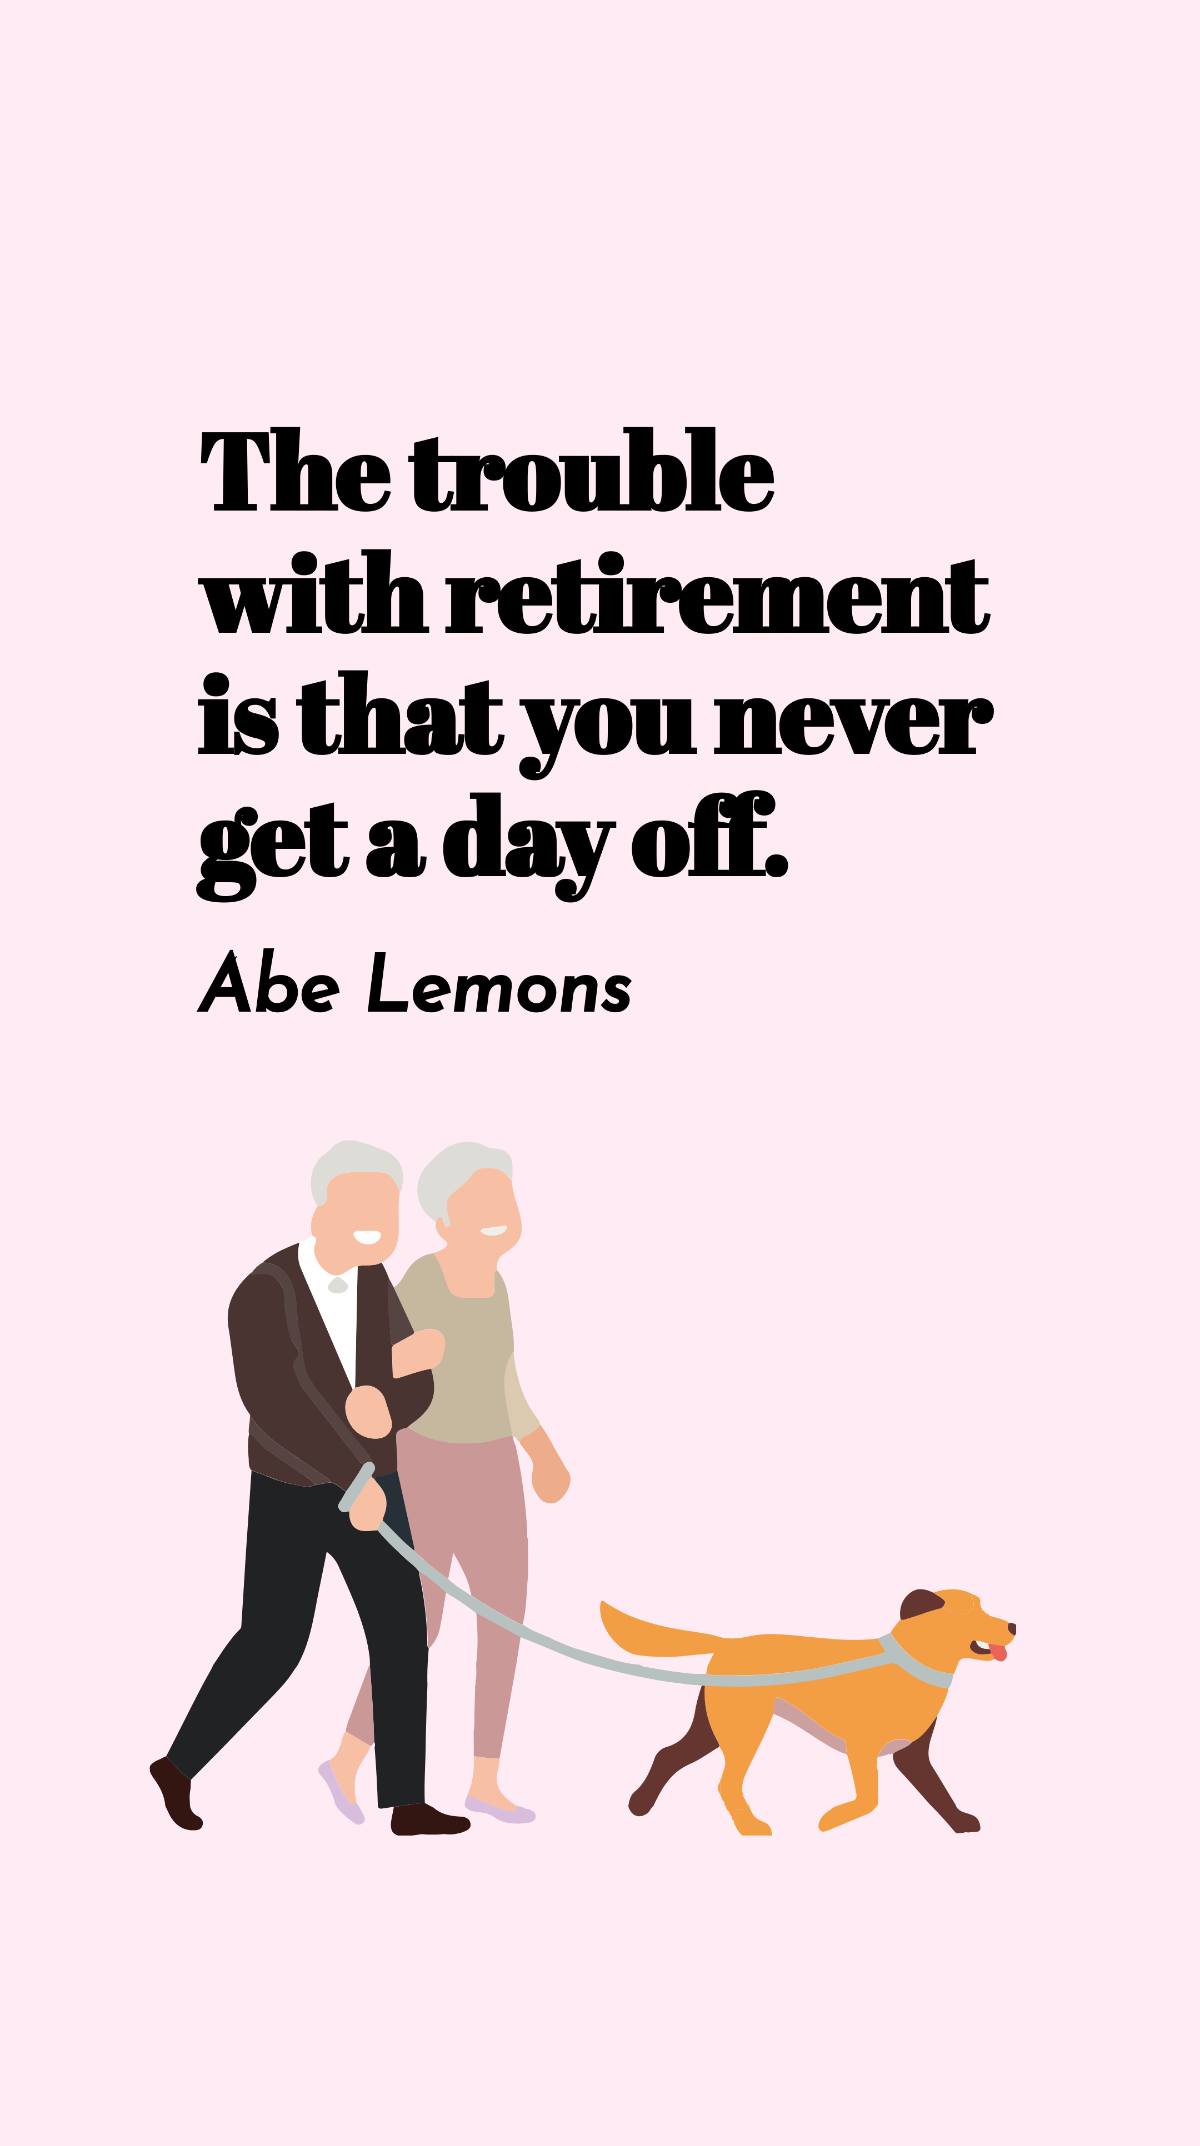 Free Abe Lemons - The trouble with retirement is that you never get a day off. Template